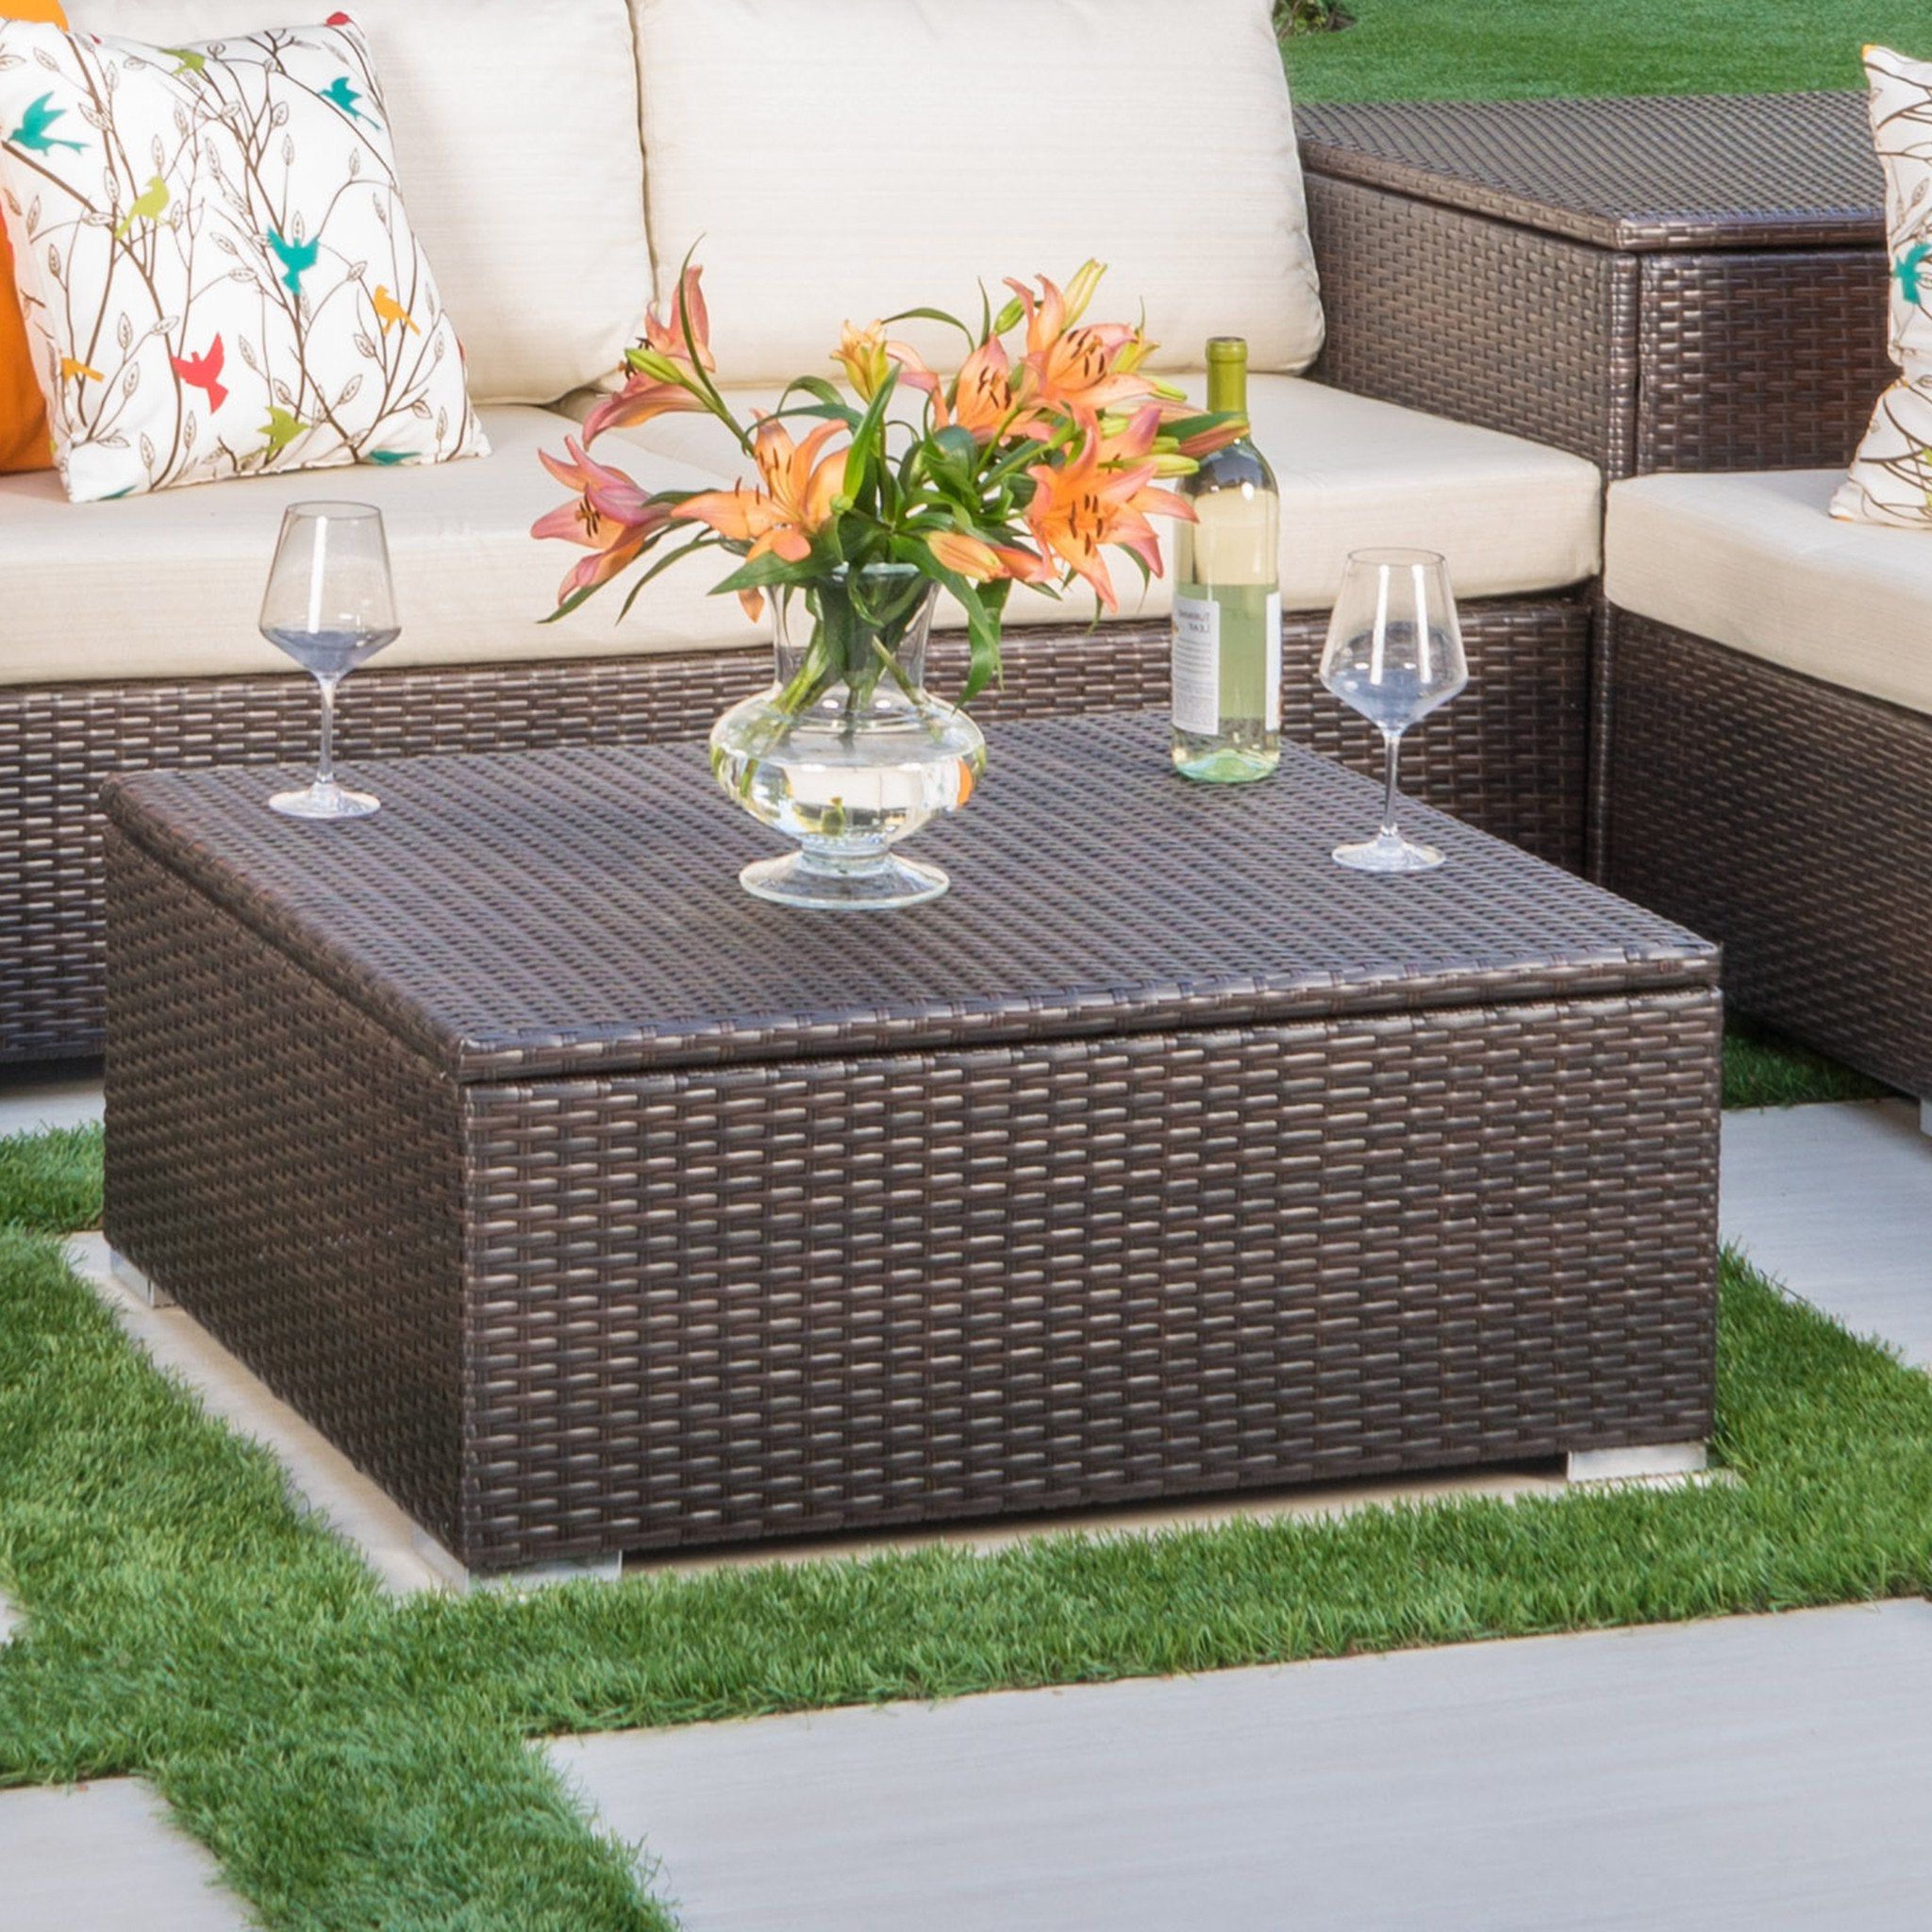 Waterproof Coffee Tables Throughout Latest Outdoor Wicker Storage Coffee Table – Nh136992 – Noble House Furniture (View 6 of 15)